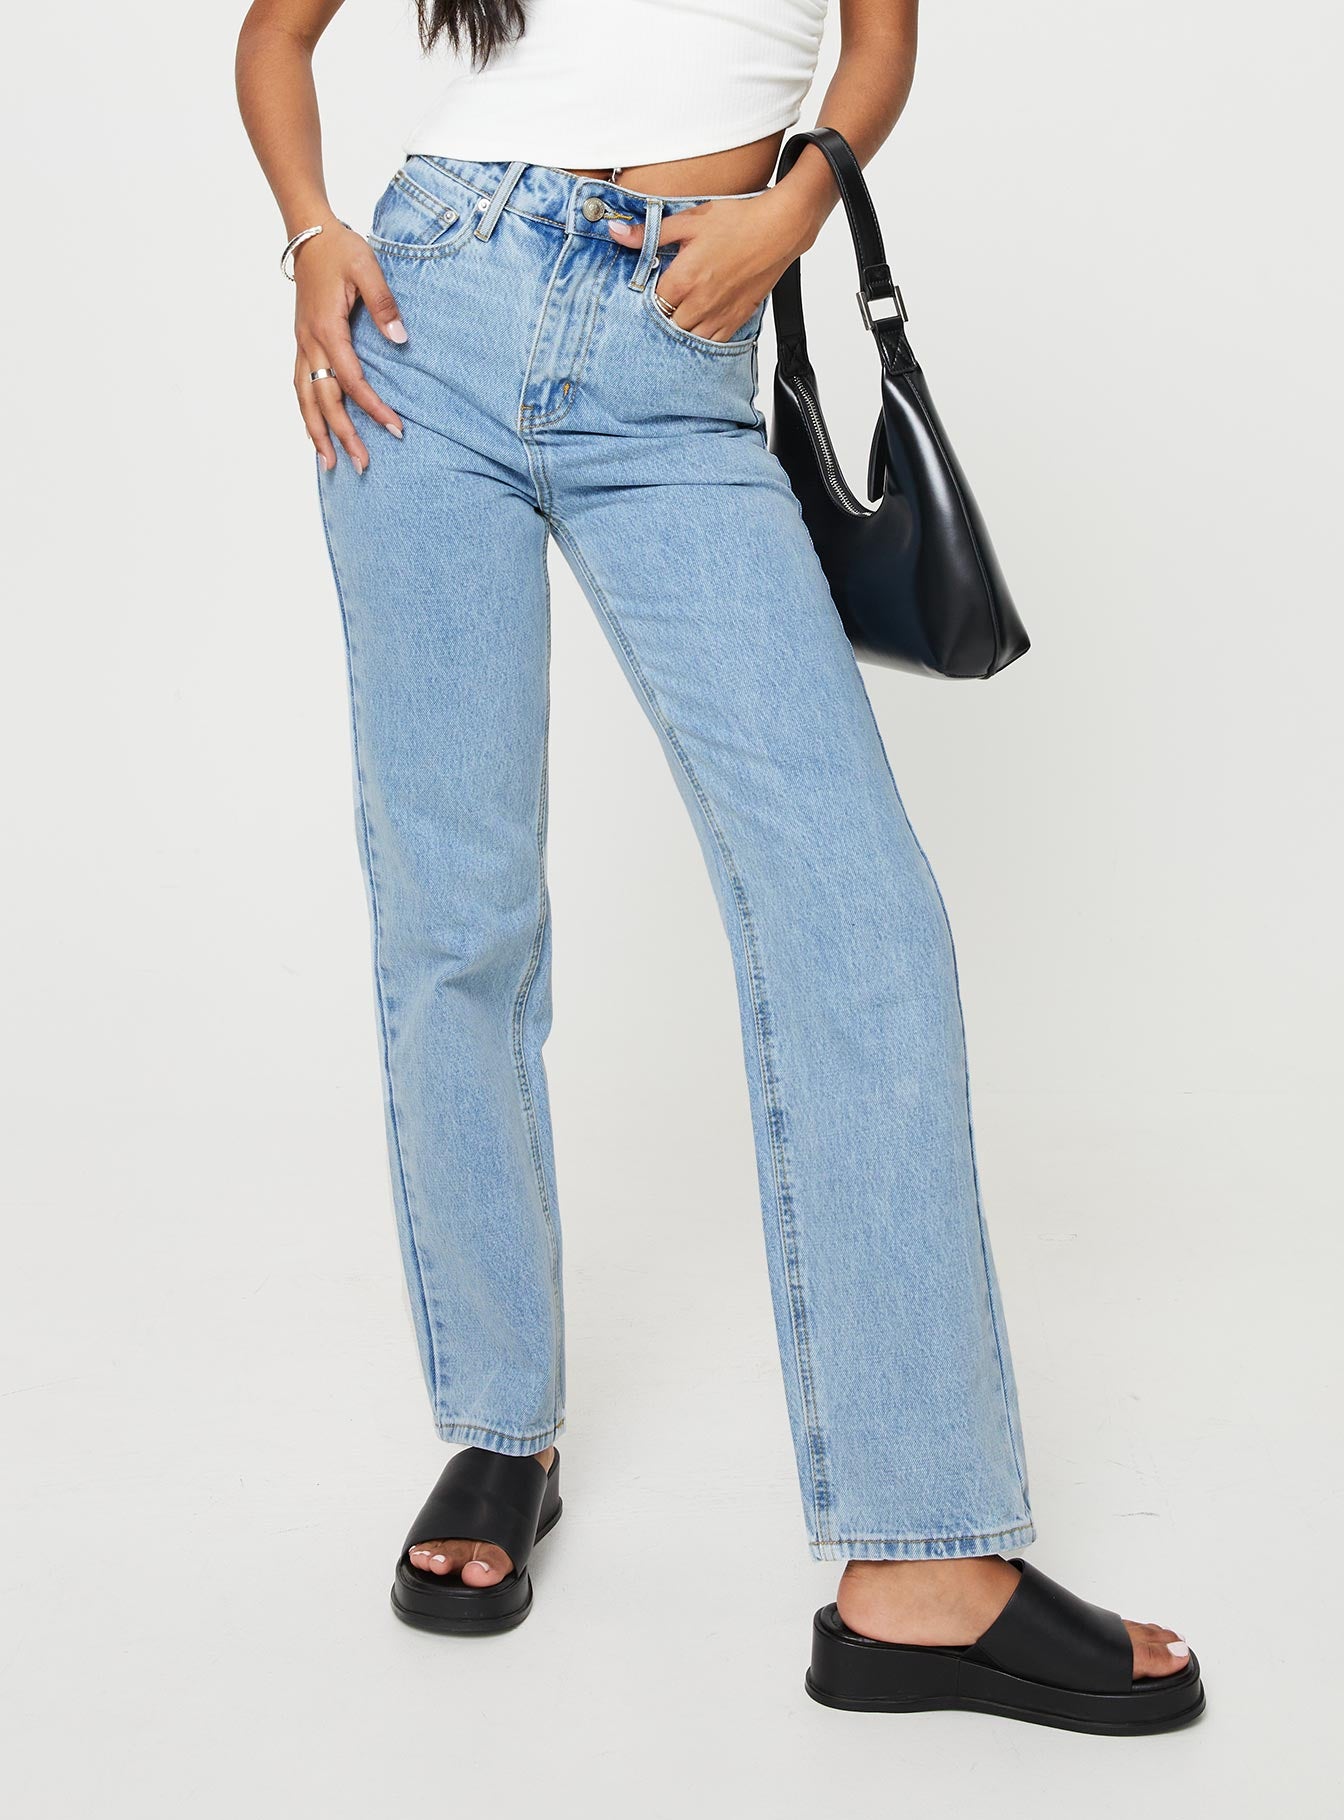 Faded Color Distressed Denim Jeans In LIGHT BLUE | ZAFUL 2024